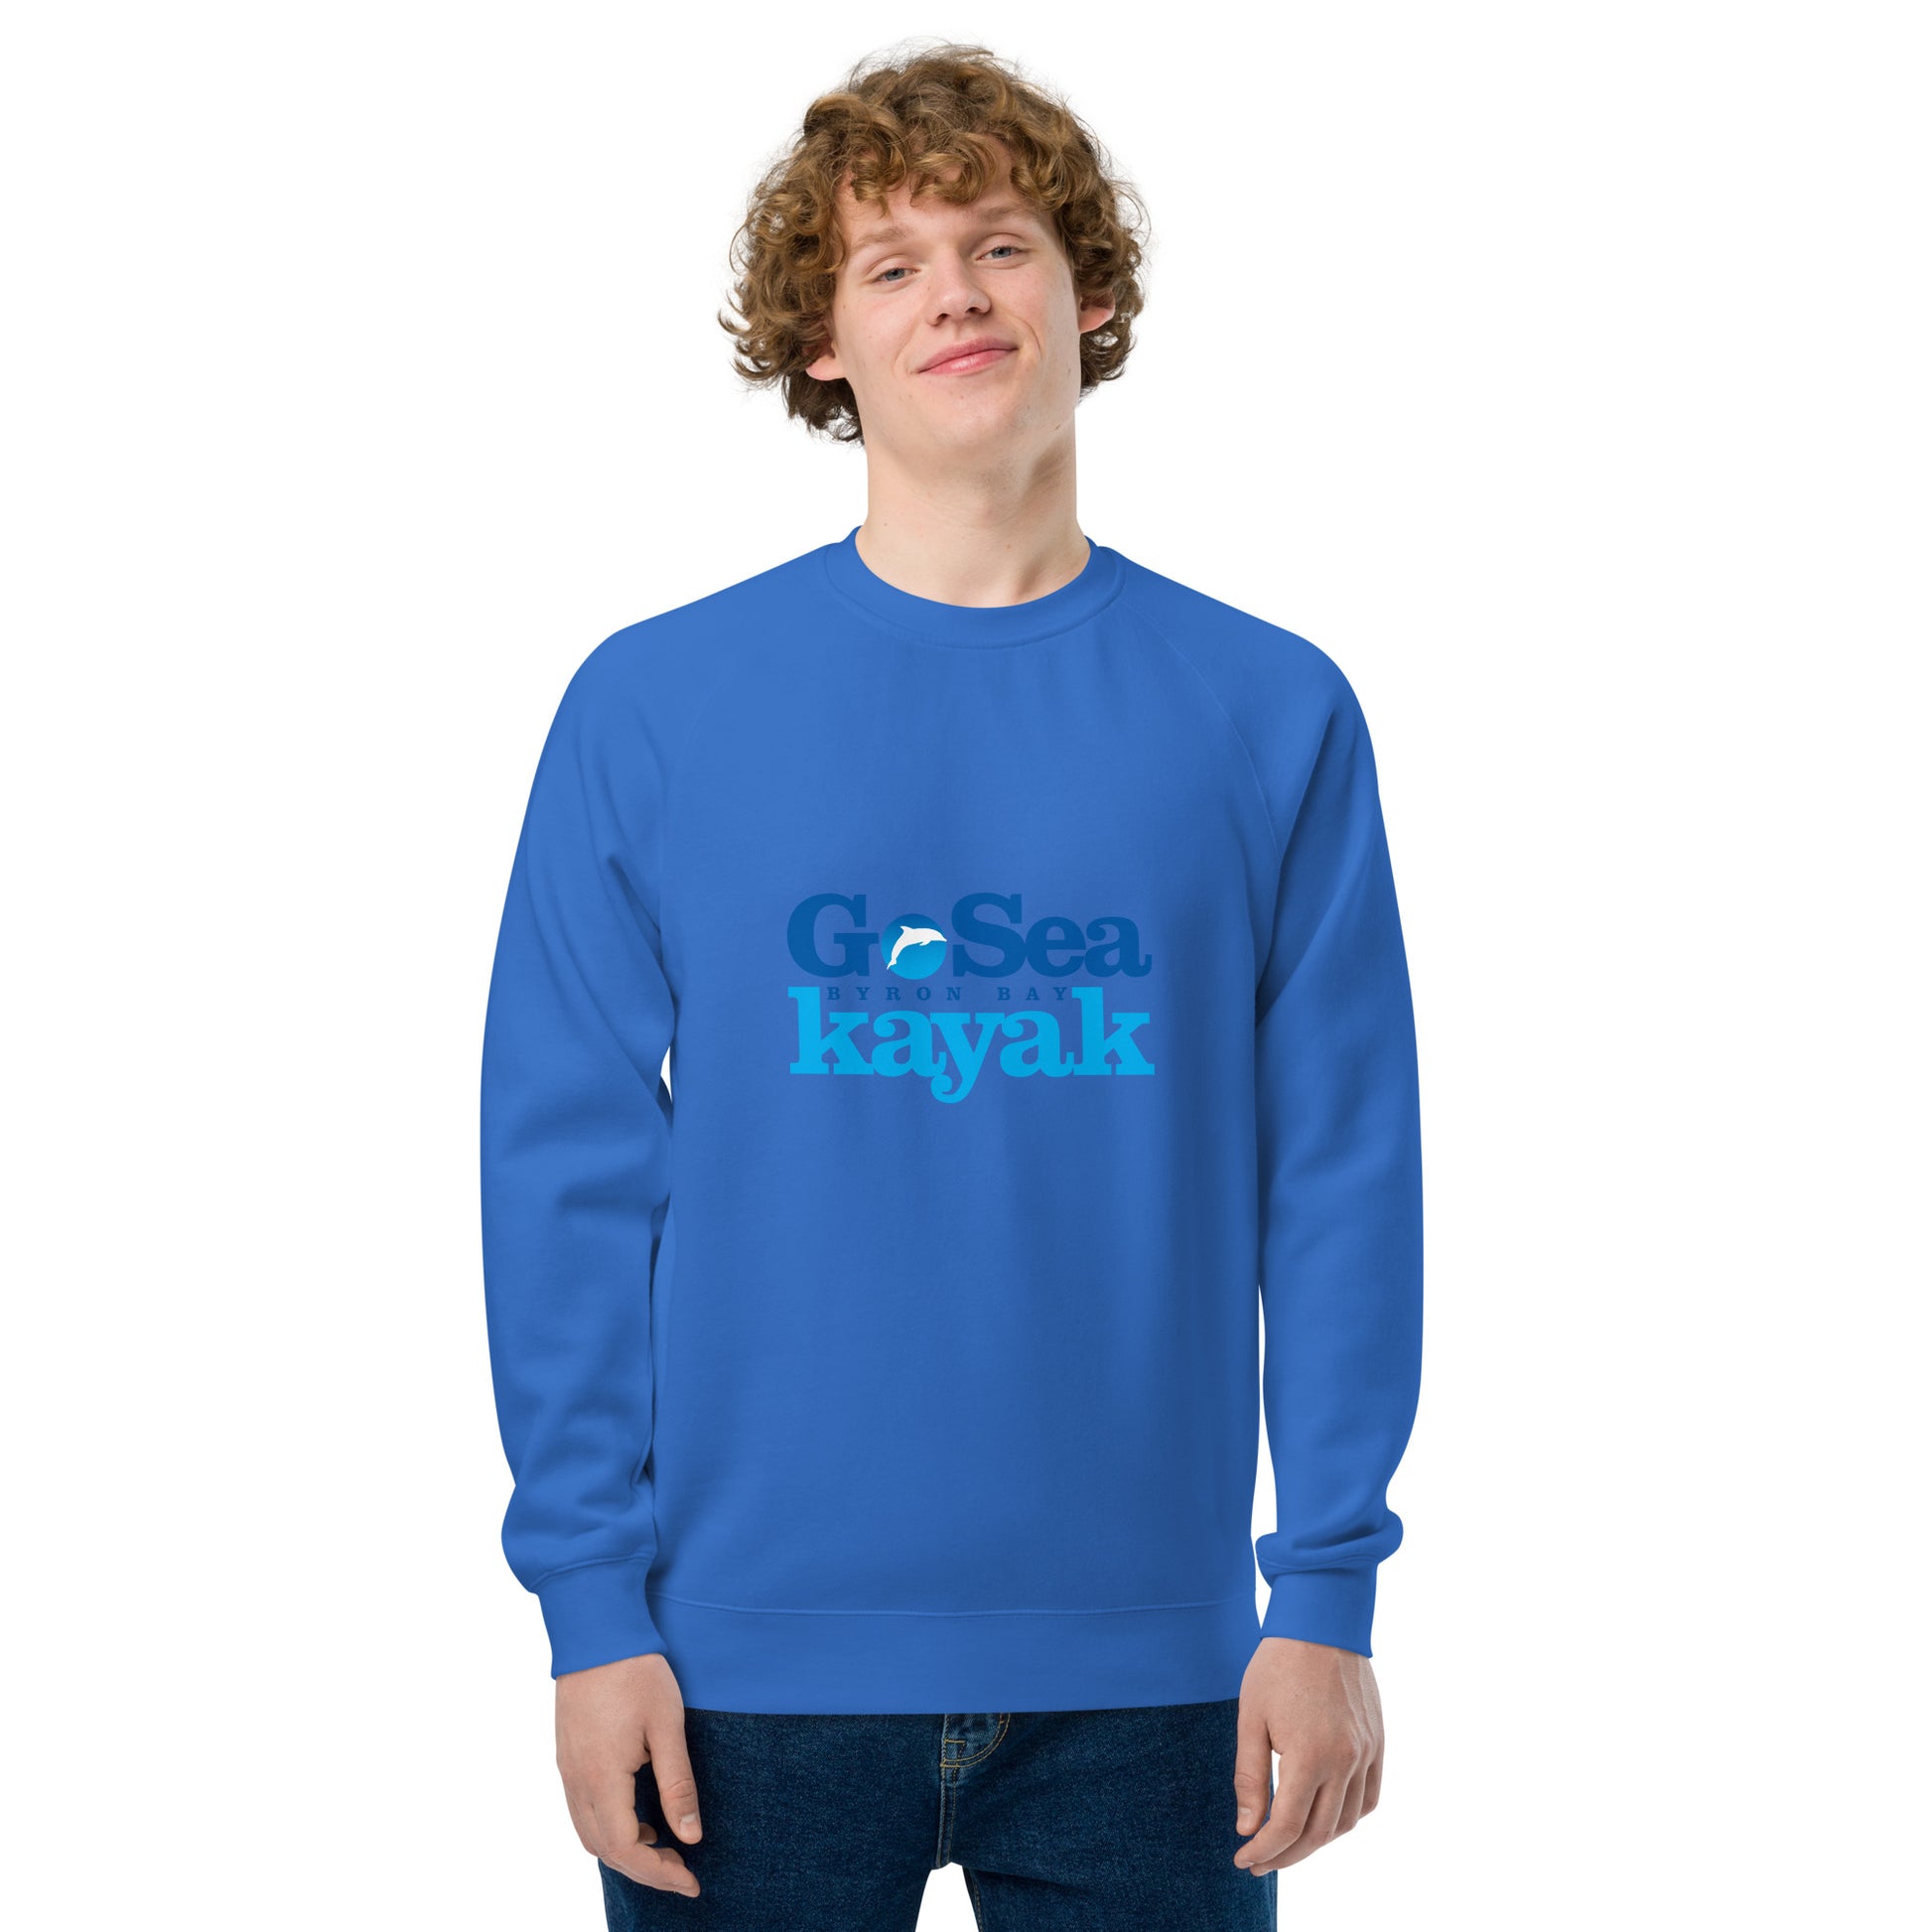  Unisex Sweatshirt - Bright Royal Blue - Front view being warn by man with arms by side - Go Sea Kayak Byron Bay logo on front - Genuine Byron Bay Merchandise | Produced by Go Sea Kayak Byron Bay 